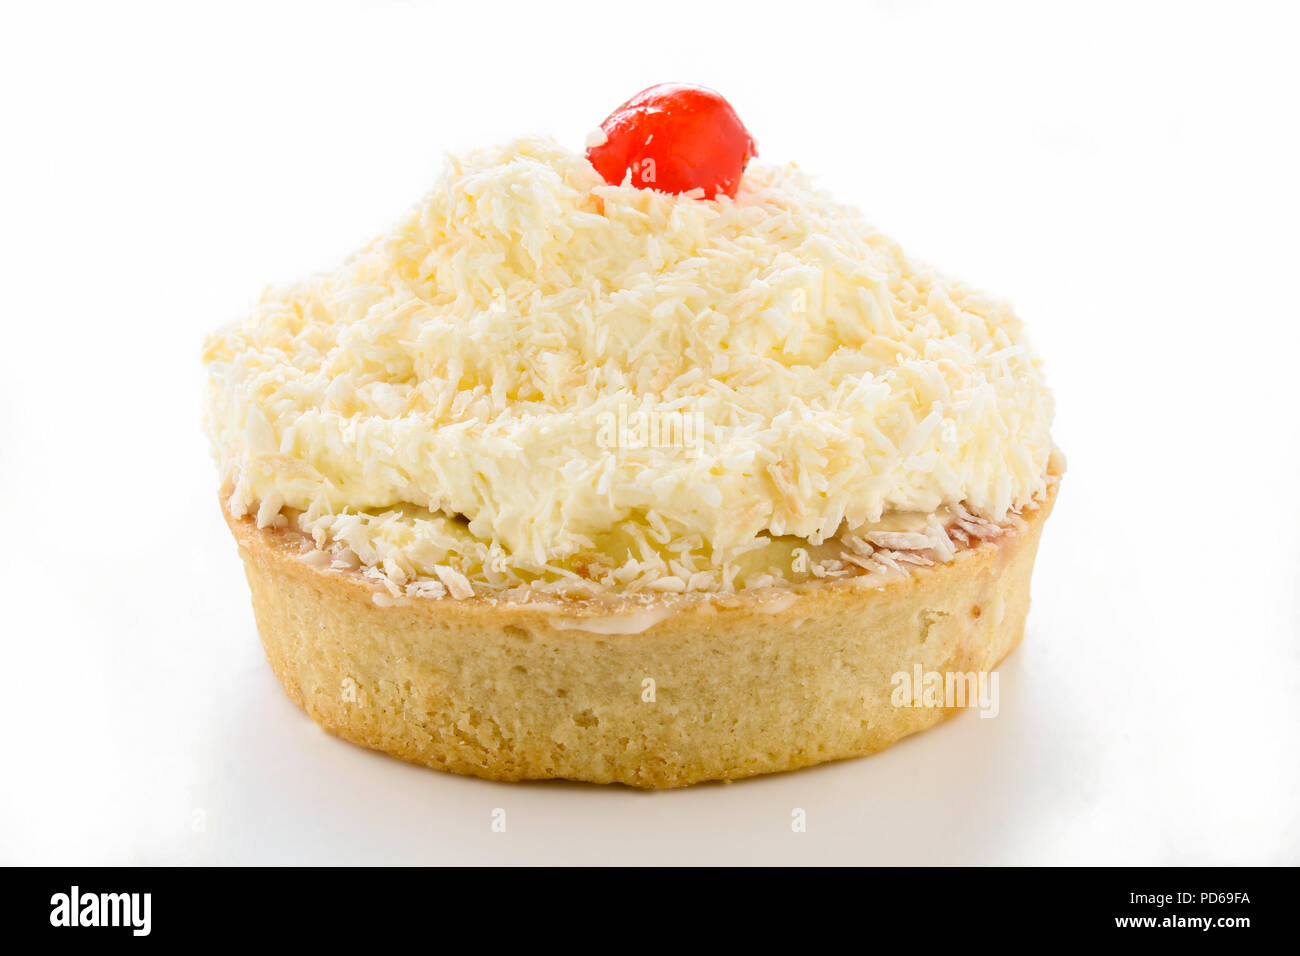 Traditionelle Manchester tart Stockfoto